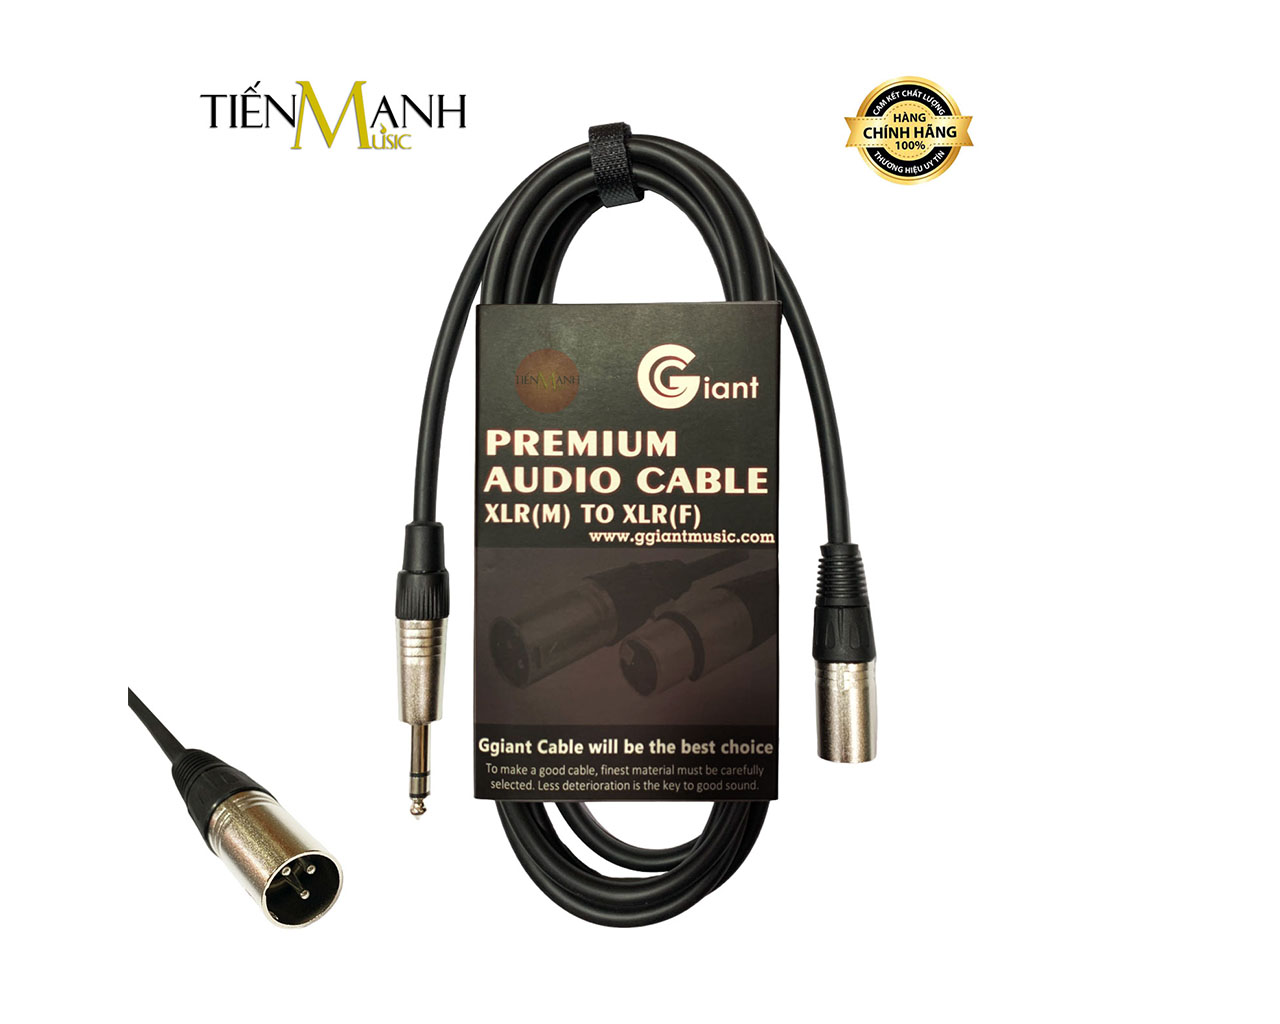 day-cap-loa-giant-dai-5m-xlr-canon-duc-sang-6ly-balanced-stereo-trs-gc24-05-cable-tin-hieu1